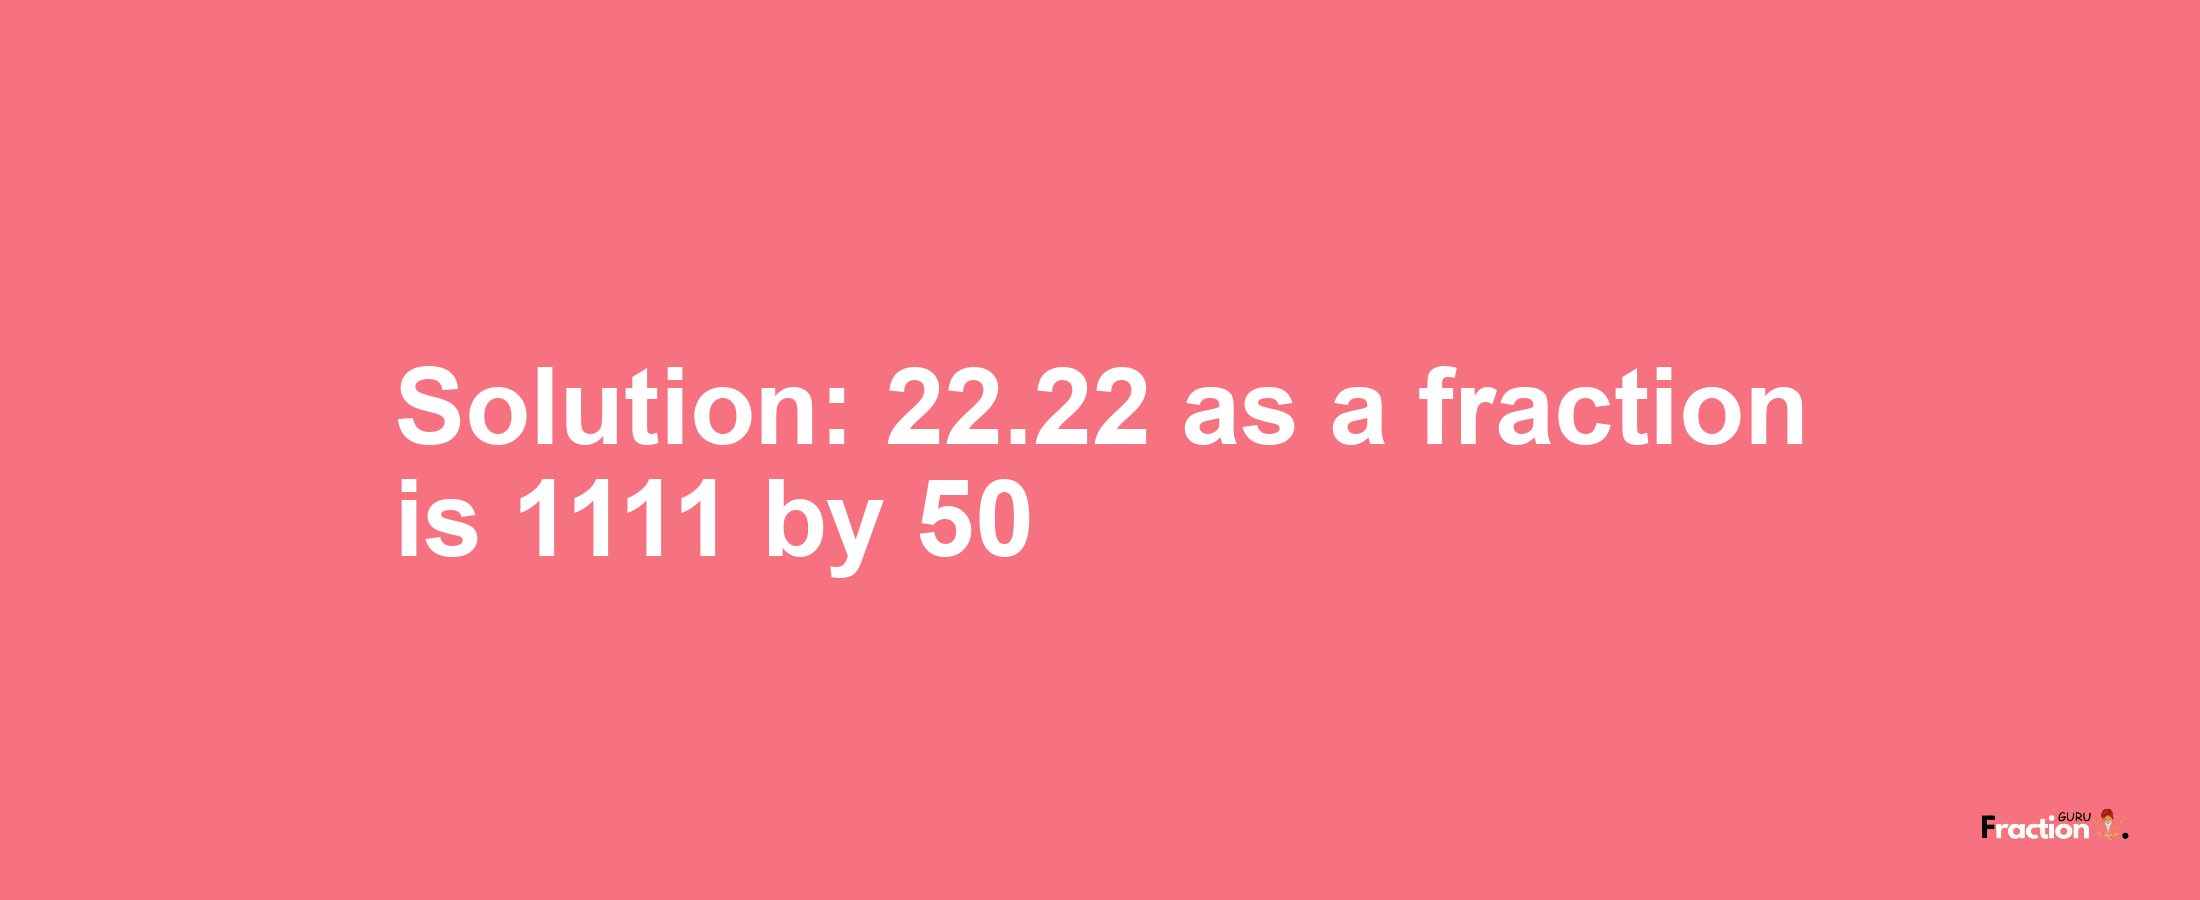 Solution:22.22 as a fraction is 1111/50